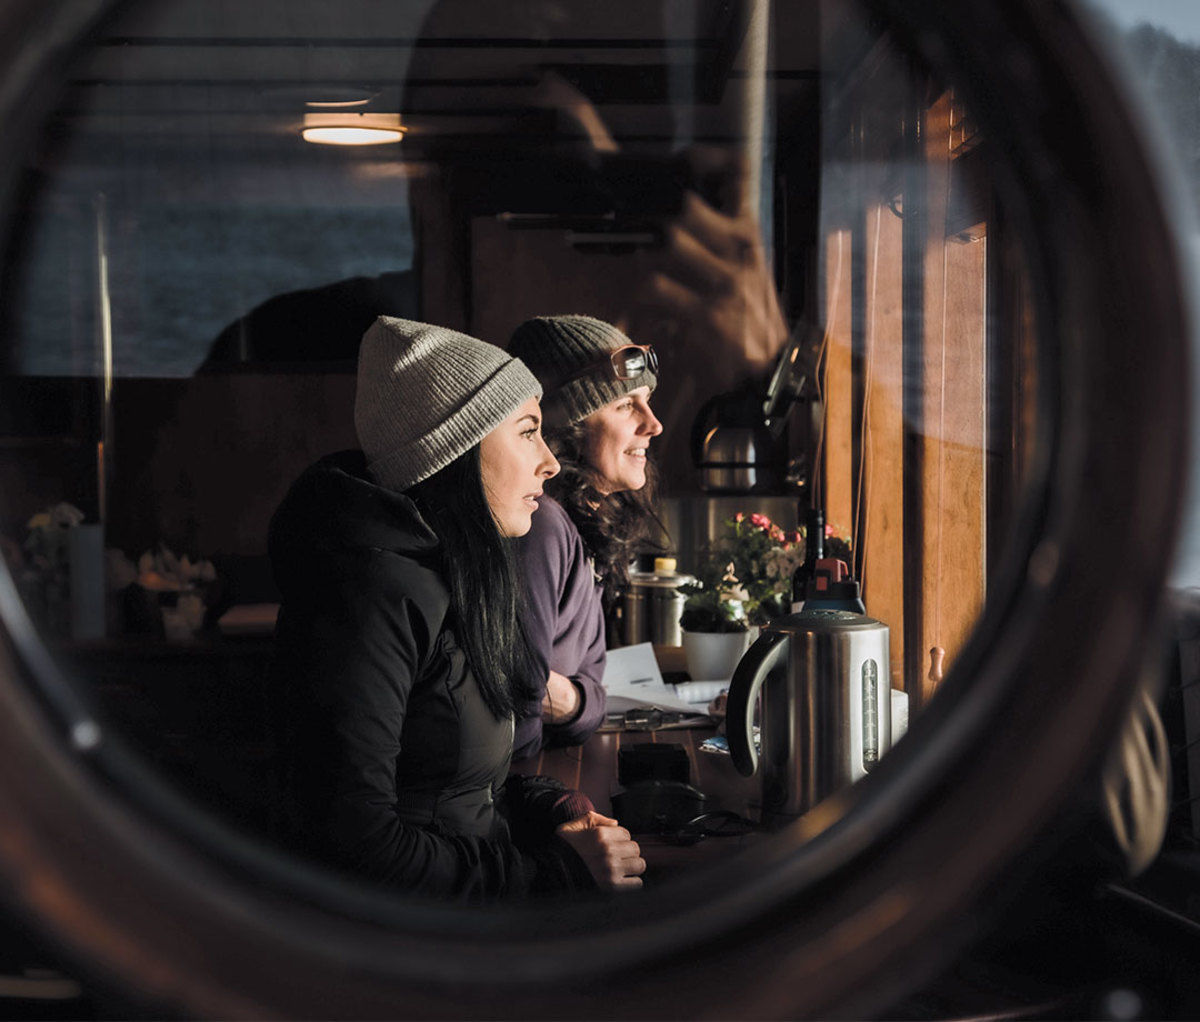 Two women looking out window through porthole